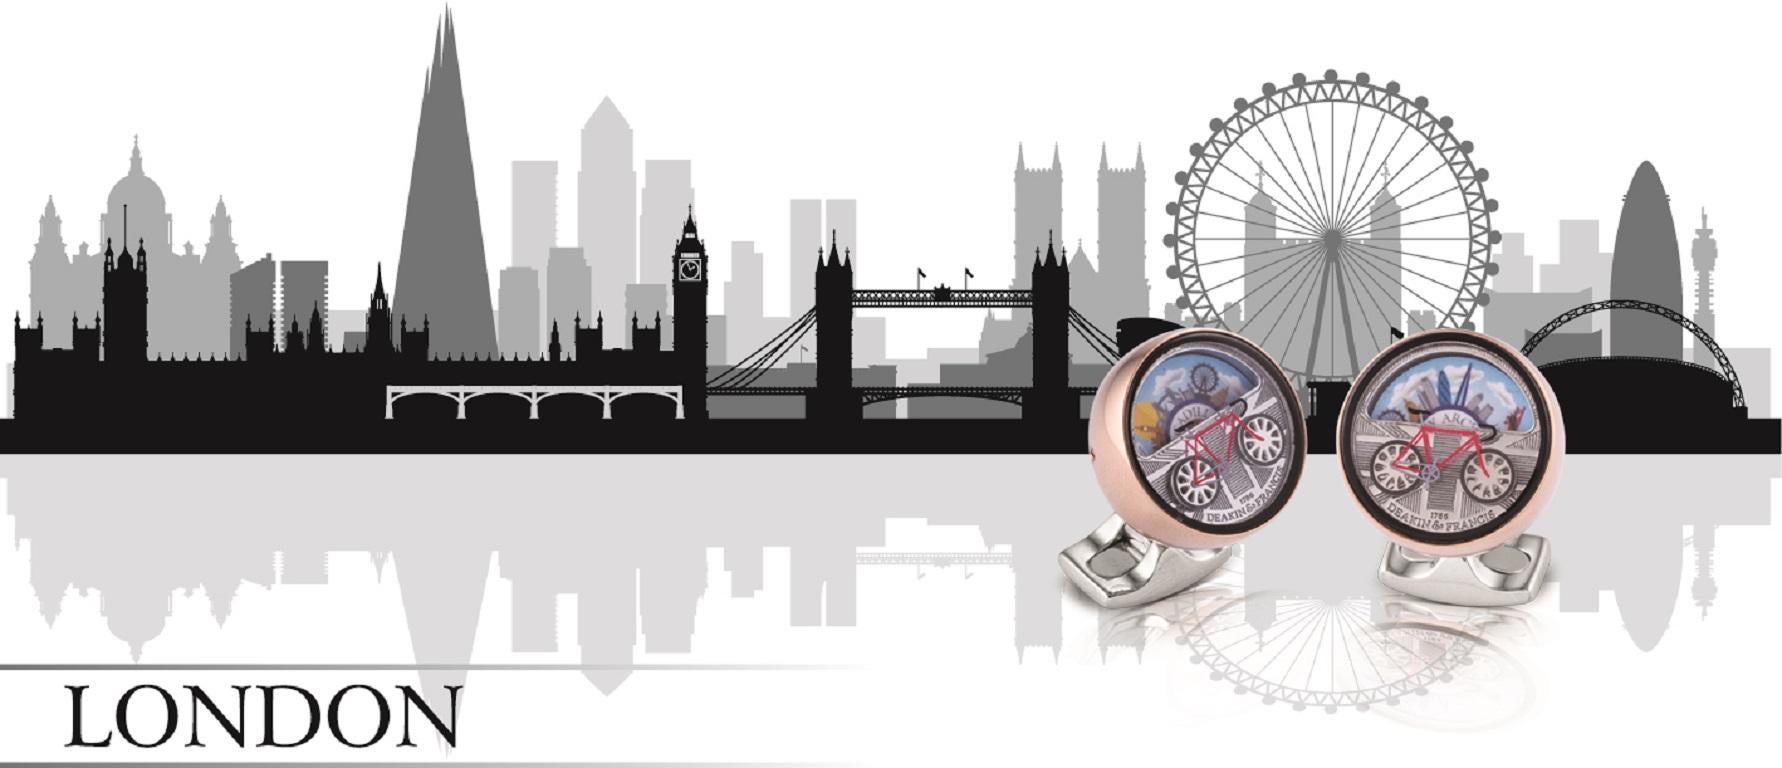 DEAKIN & FRANCIS, Piccadilly Arcade, London

Do you love a bit of sight-seeing, or like to marvel at the wonders of your favourite city? These moving scene cufflinks of London are perfect for spotting your favourite tourist attractions.
Twist the